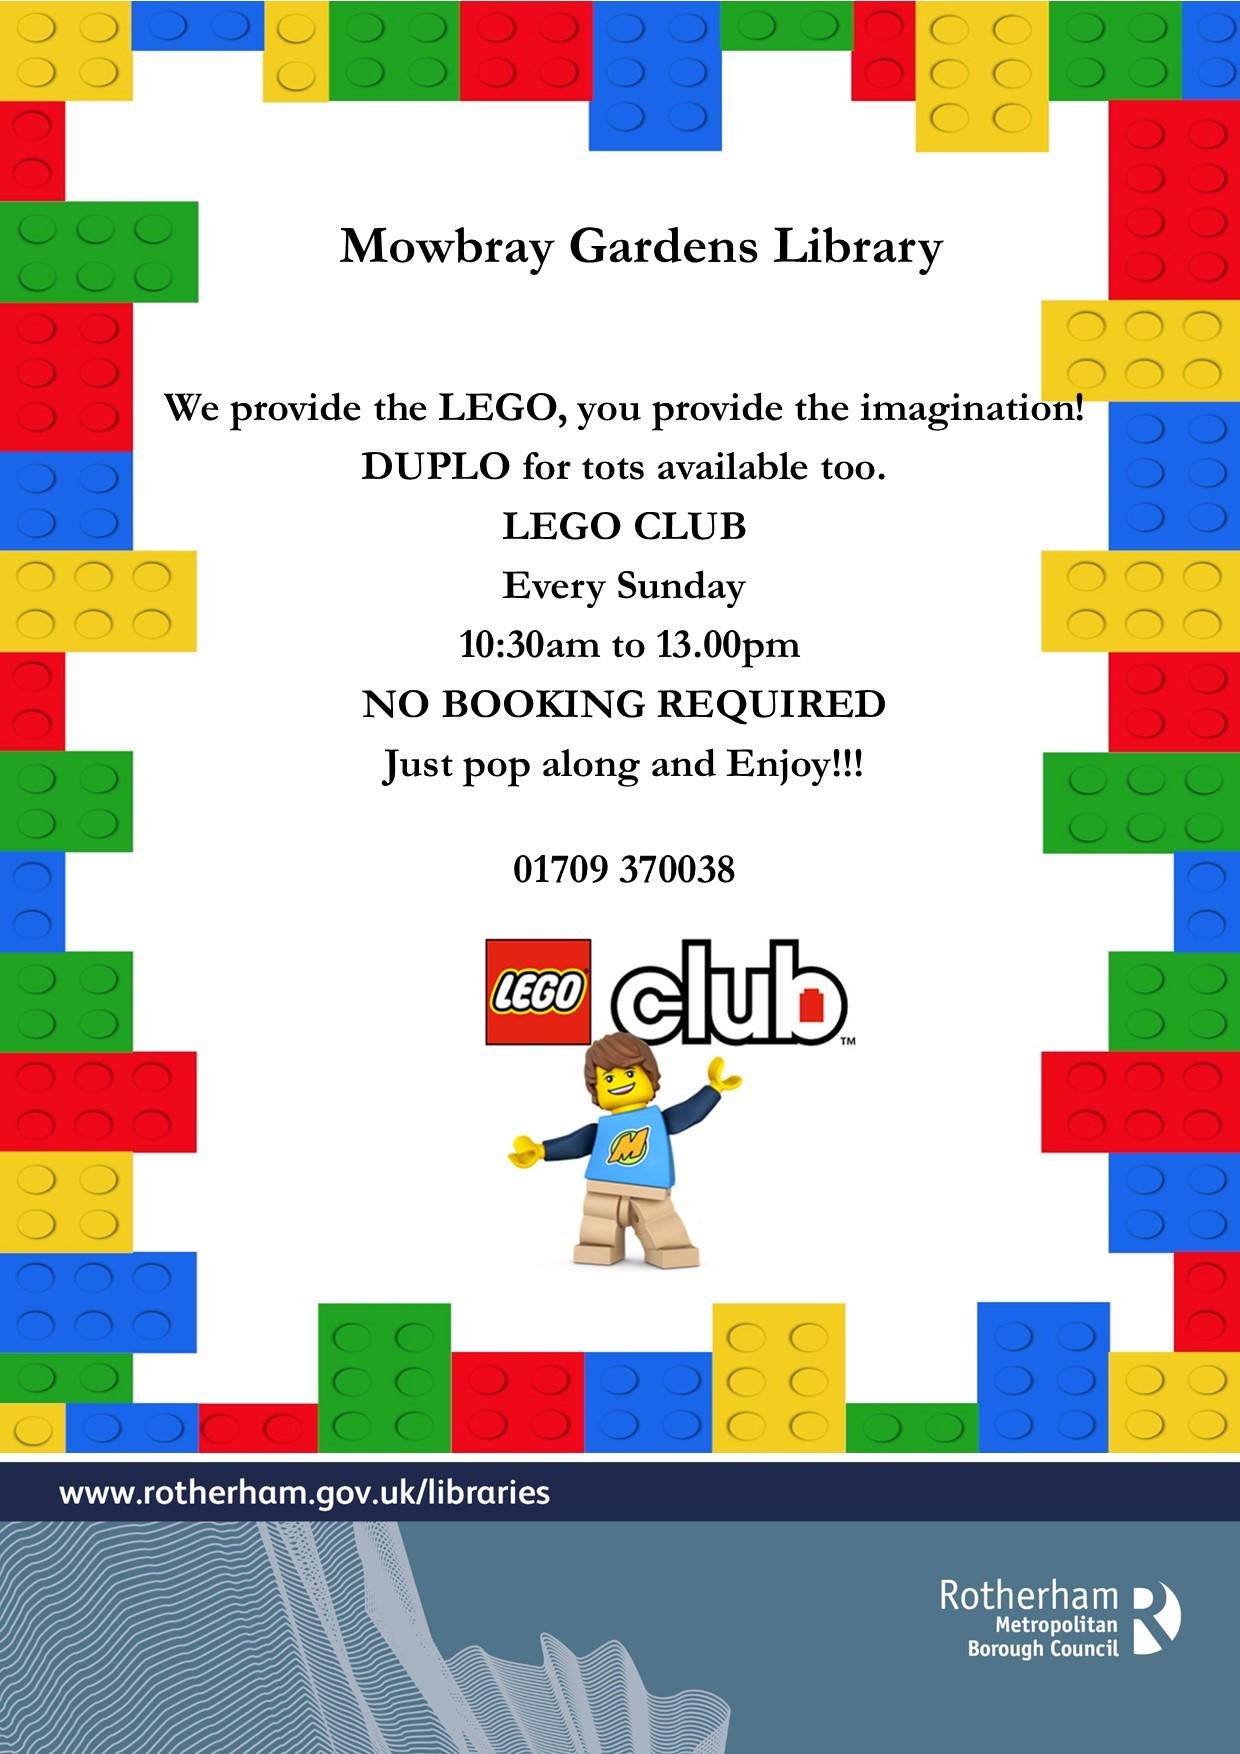 Mowbray Gardens Lego Club poster and details